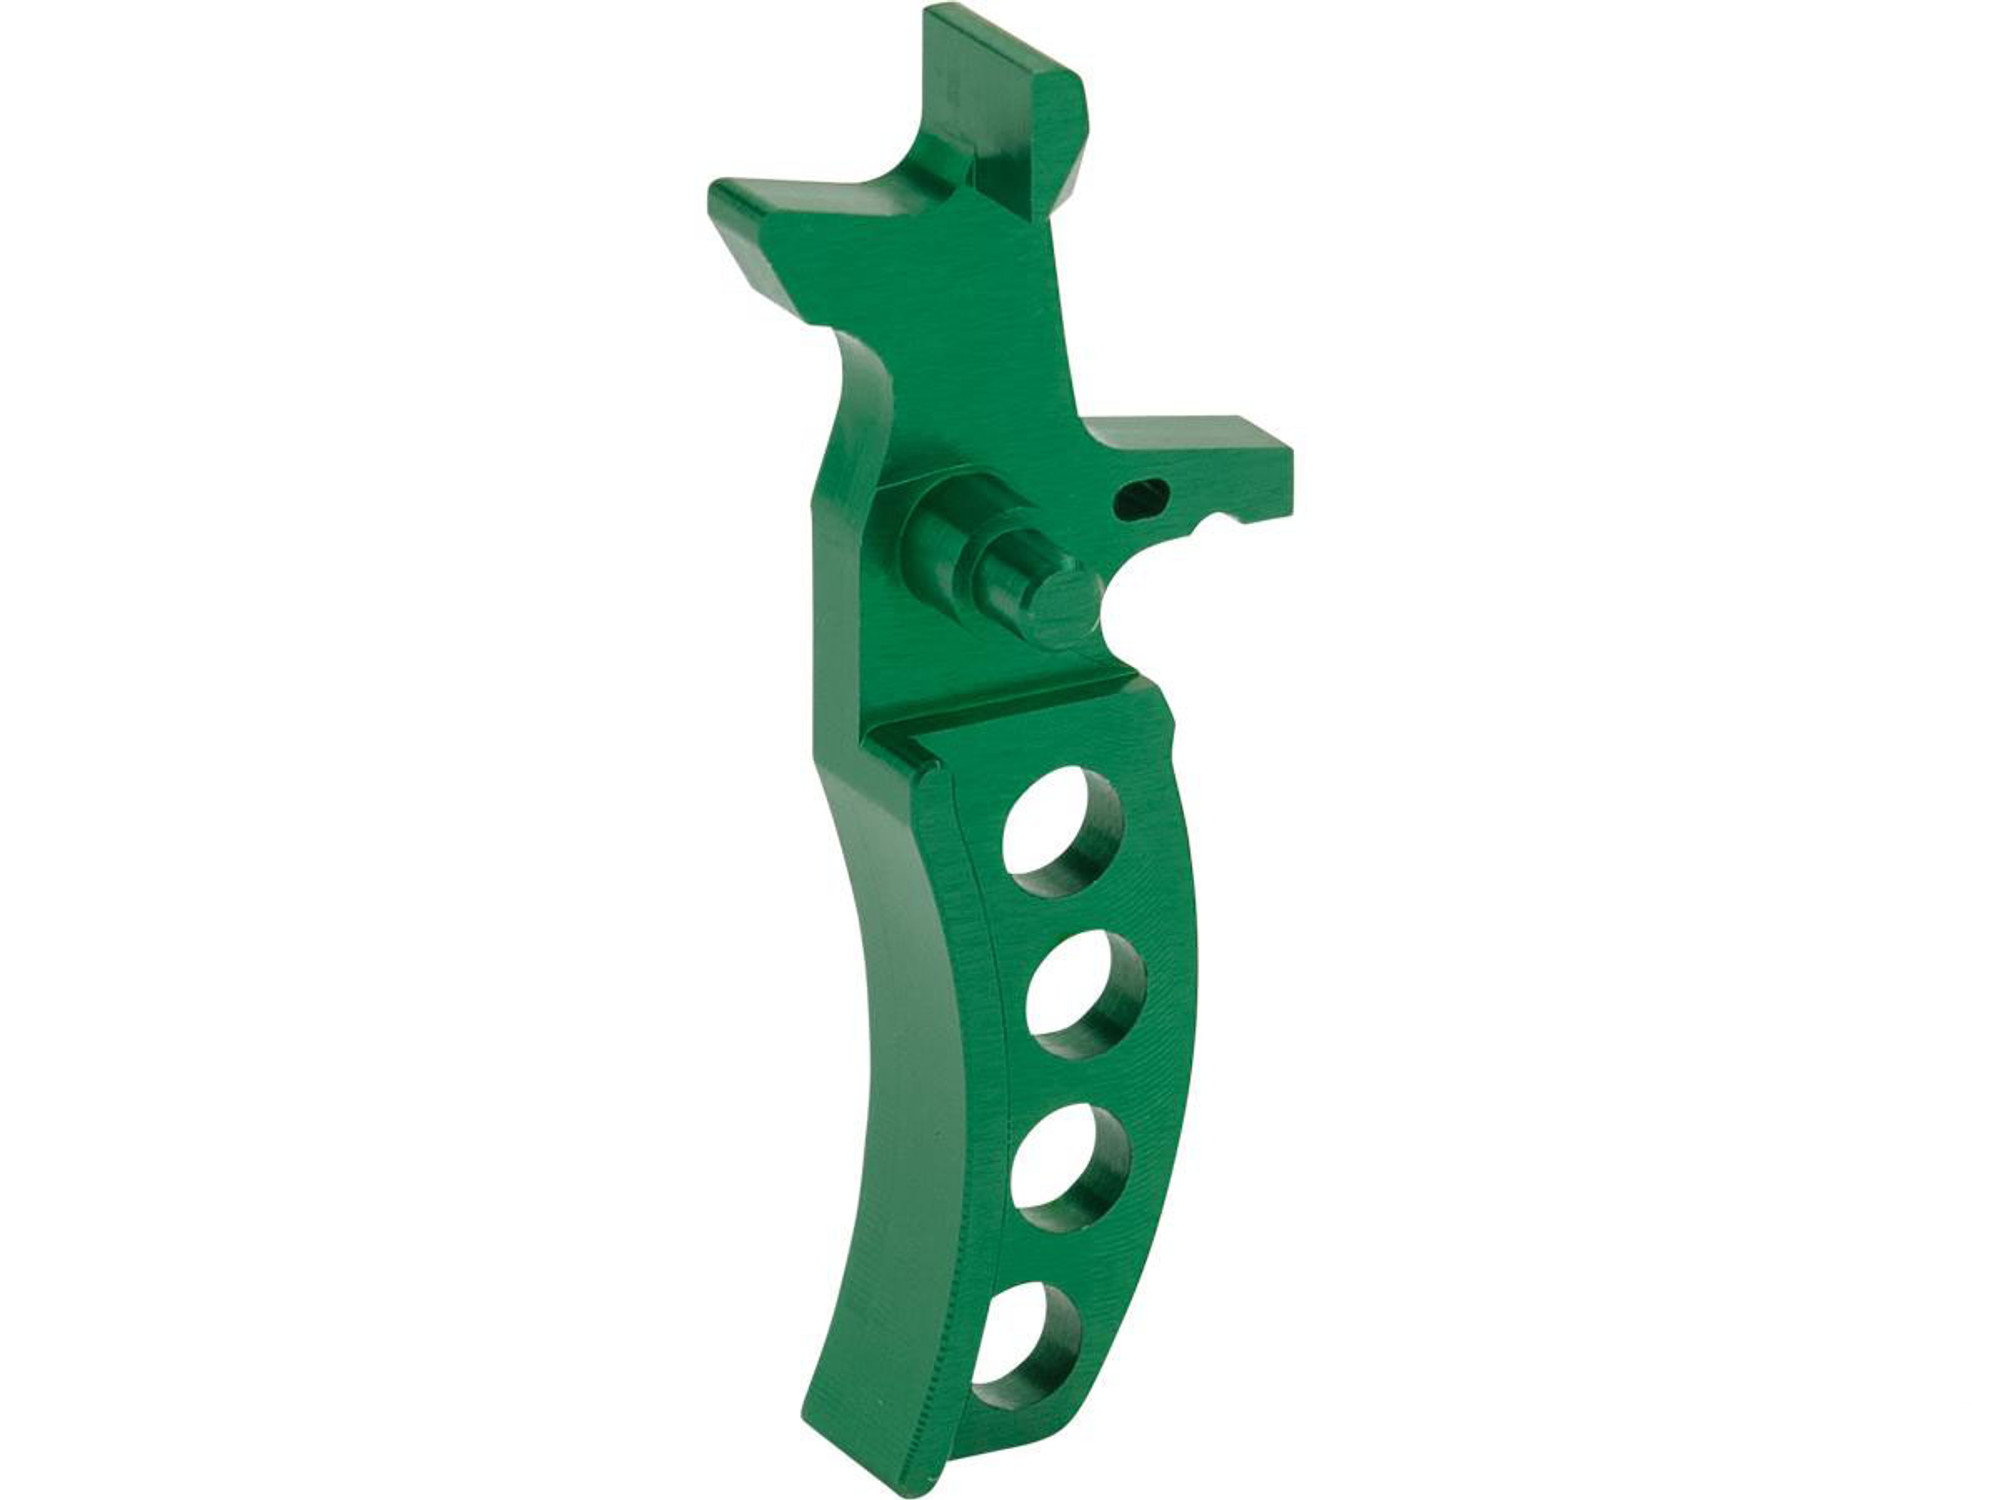 Retro Arms CNC Machined Aluminum Trigger for M4 / M16 Series AEG Rifles (Color: Green / Style D)